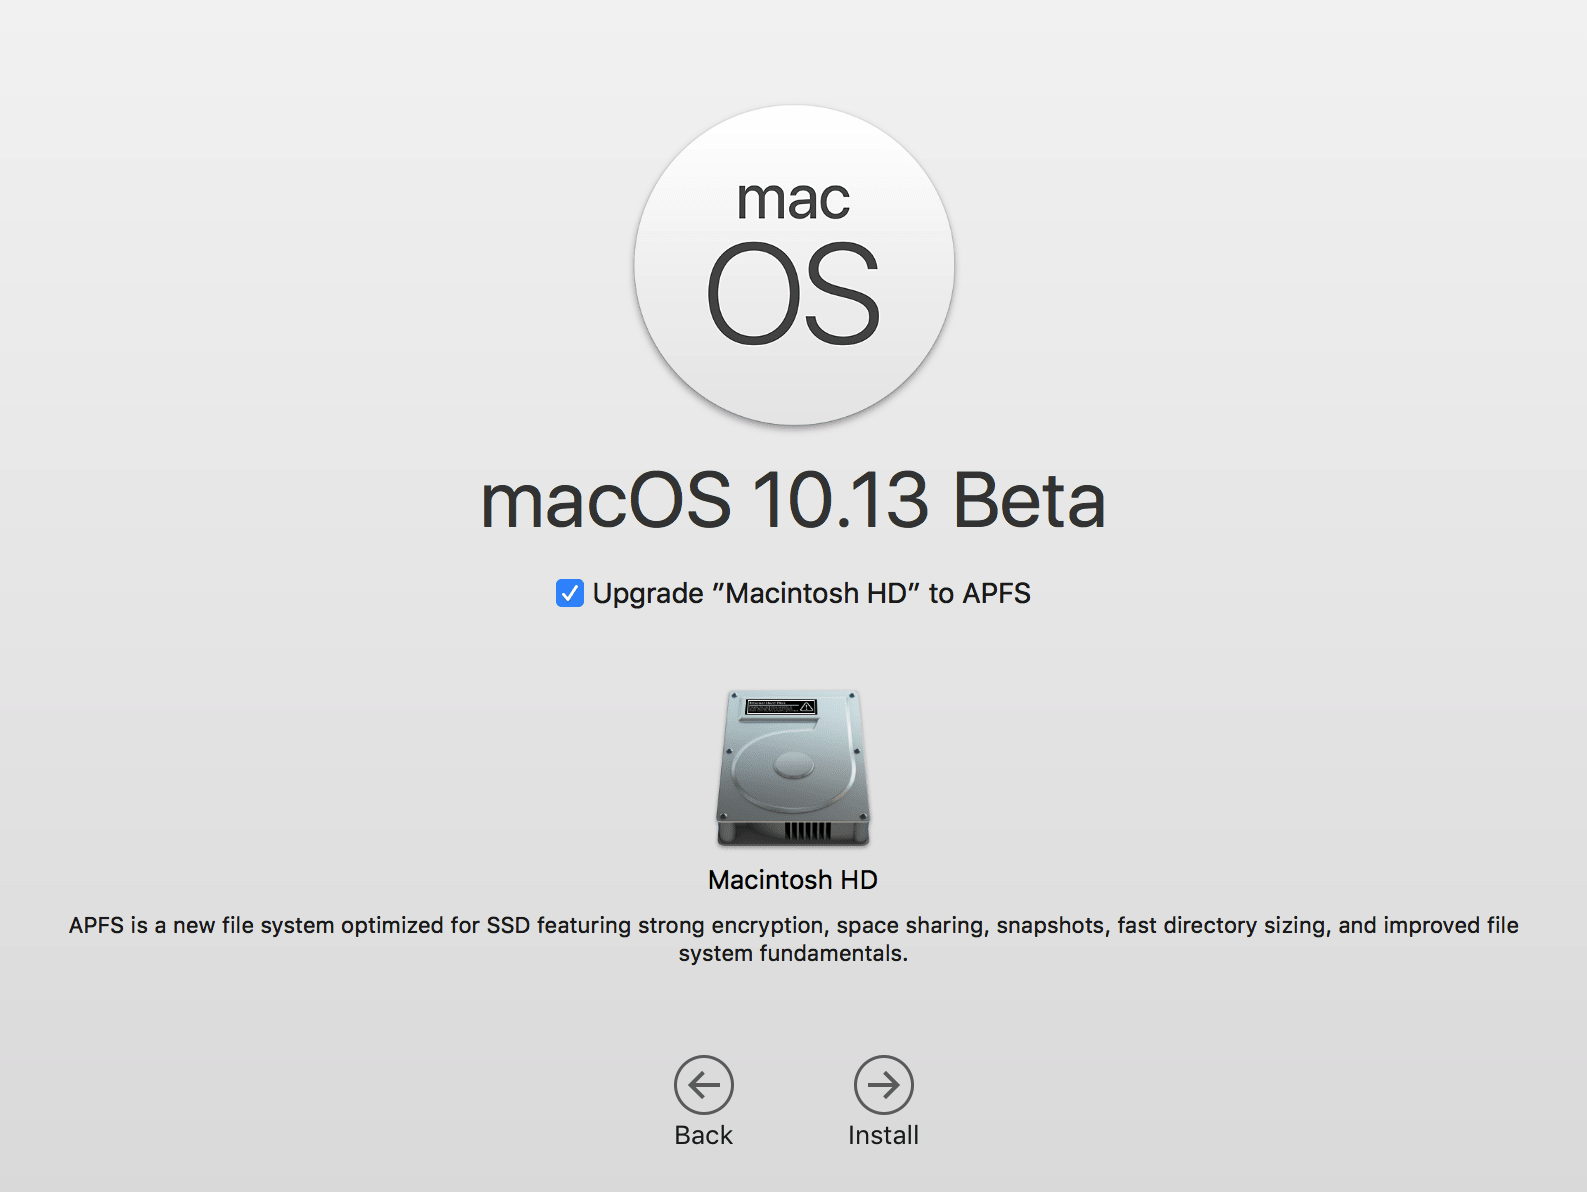 How to install macOS 10.13 High Sierra Beta from USB